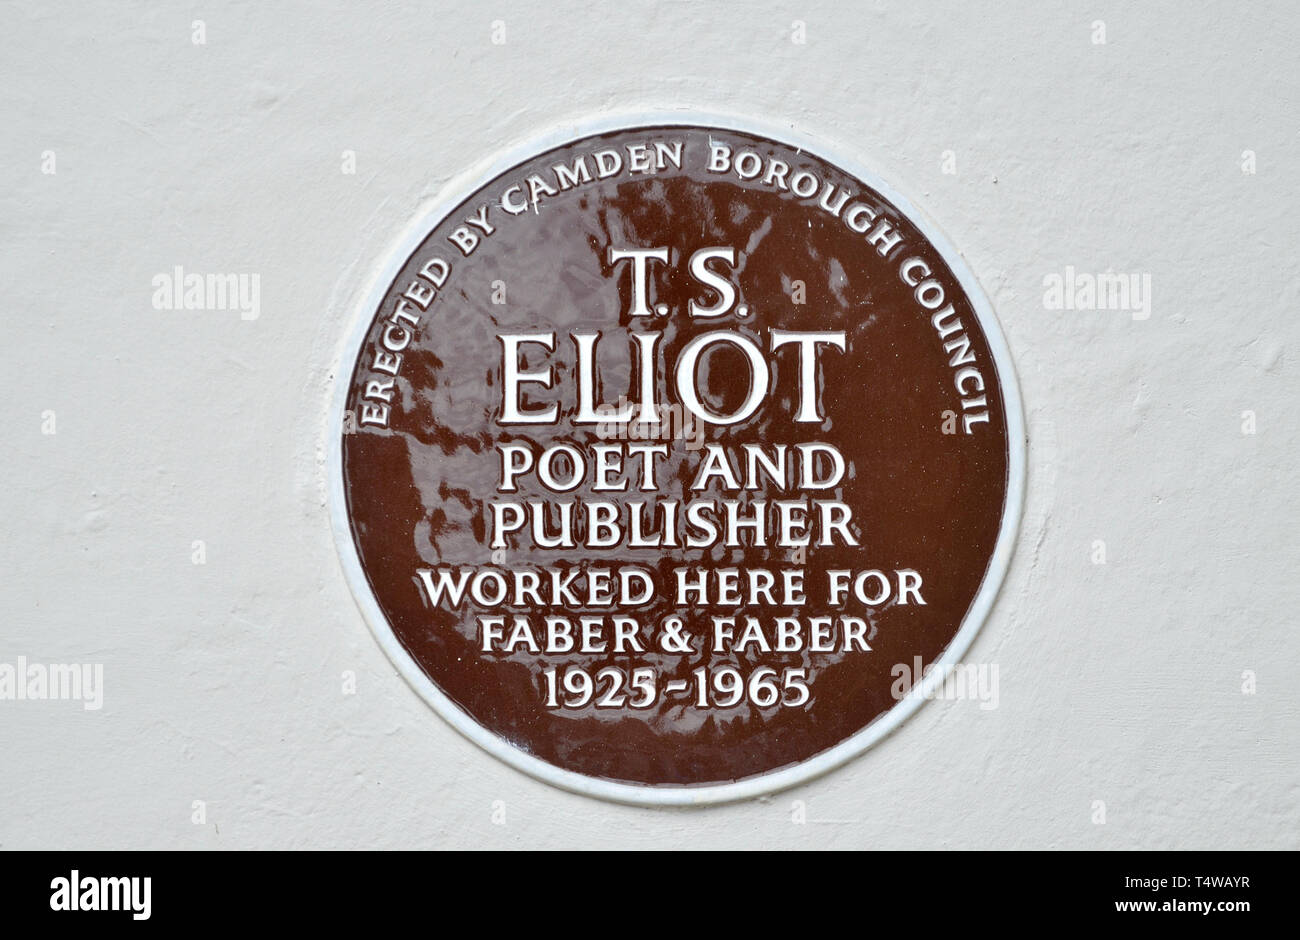 London, England, UK. Commemorative Blue Plaque: T. S. Eliot (1888-1965), poet and publisher worked here for Faber and Faber 1925-1965. Russell Square Stock Photo